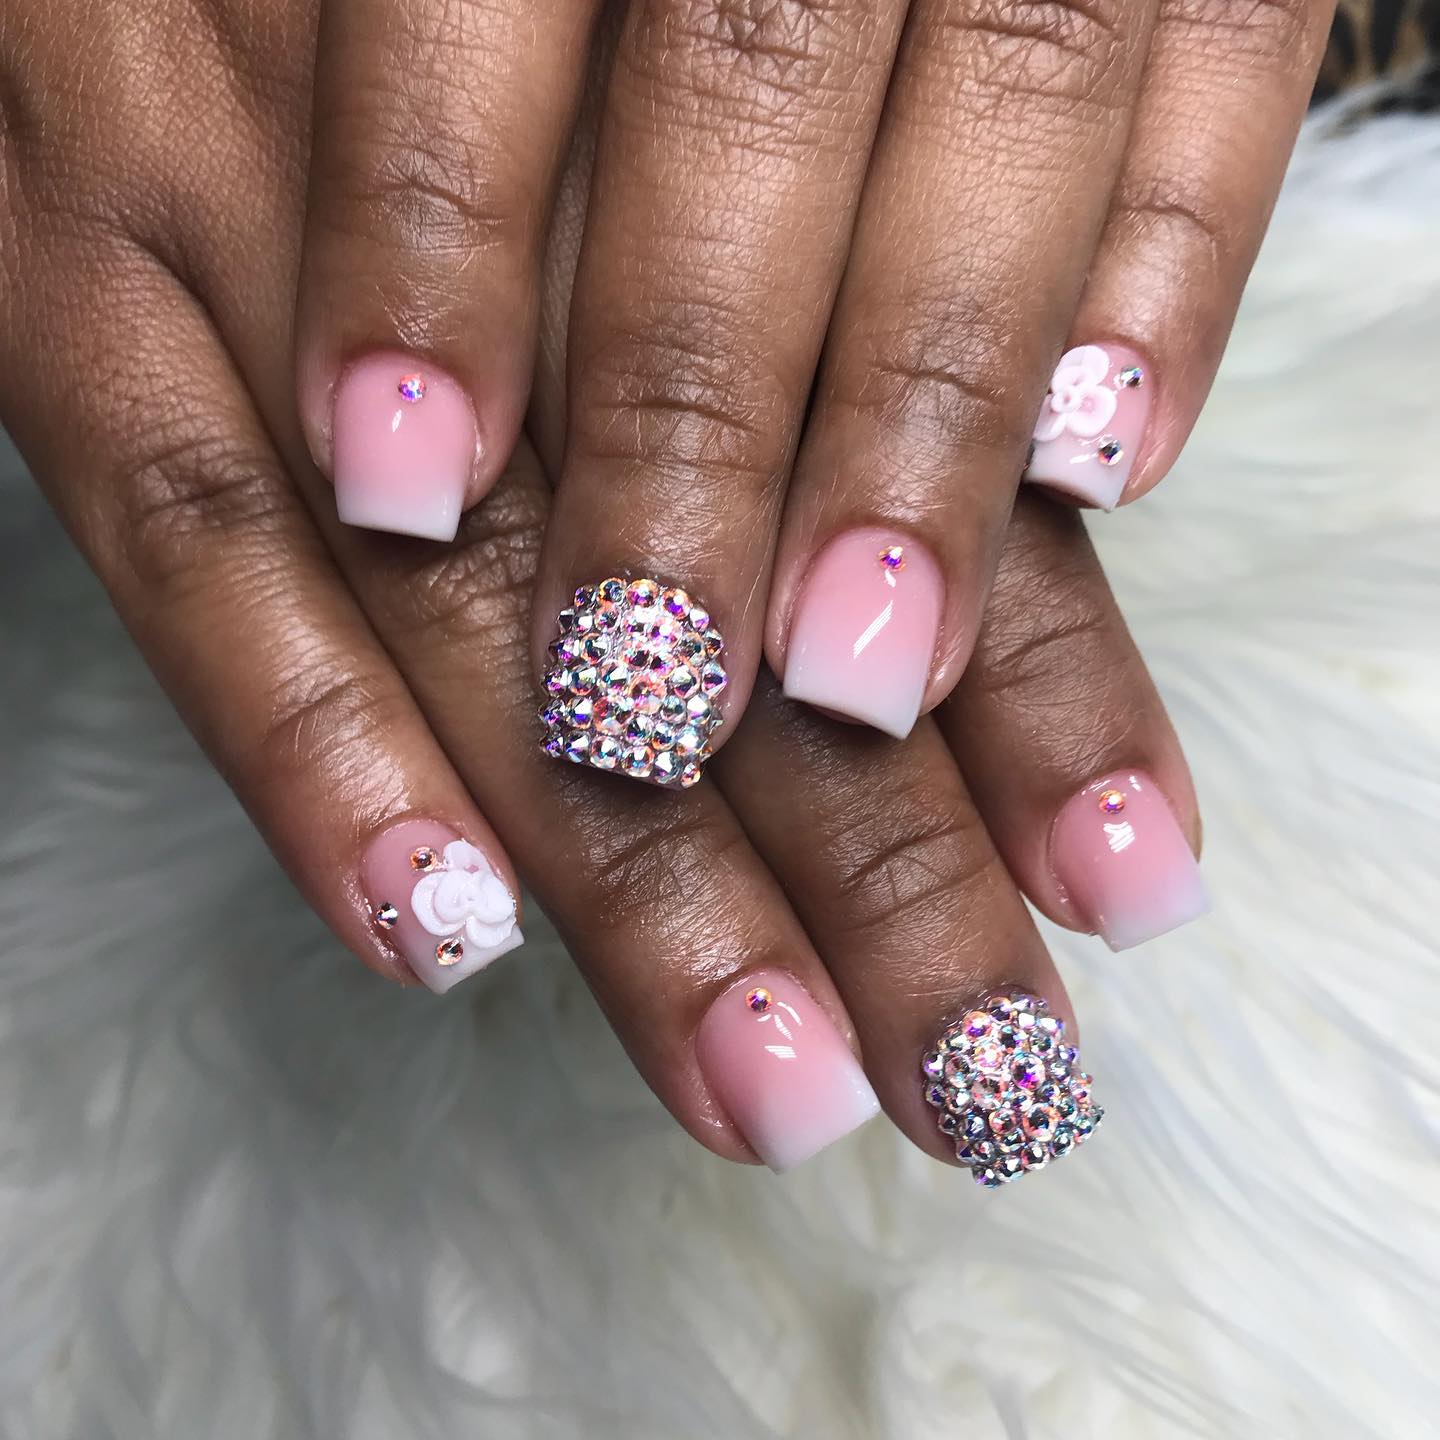 Here is another example of pink and white ombre nails with an accent nail that is covered in stones. This accent nail can help you catch attention to your ombre nails easily. Plus, you don't have to have long nails since they also look great on your short nails.